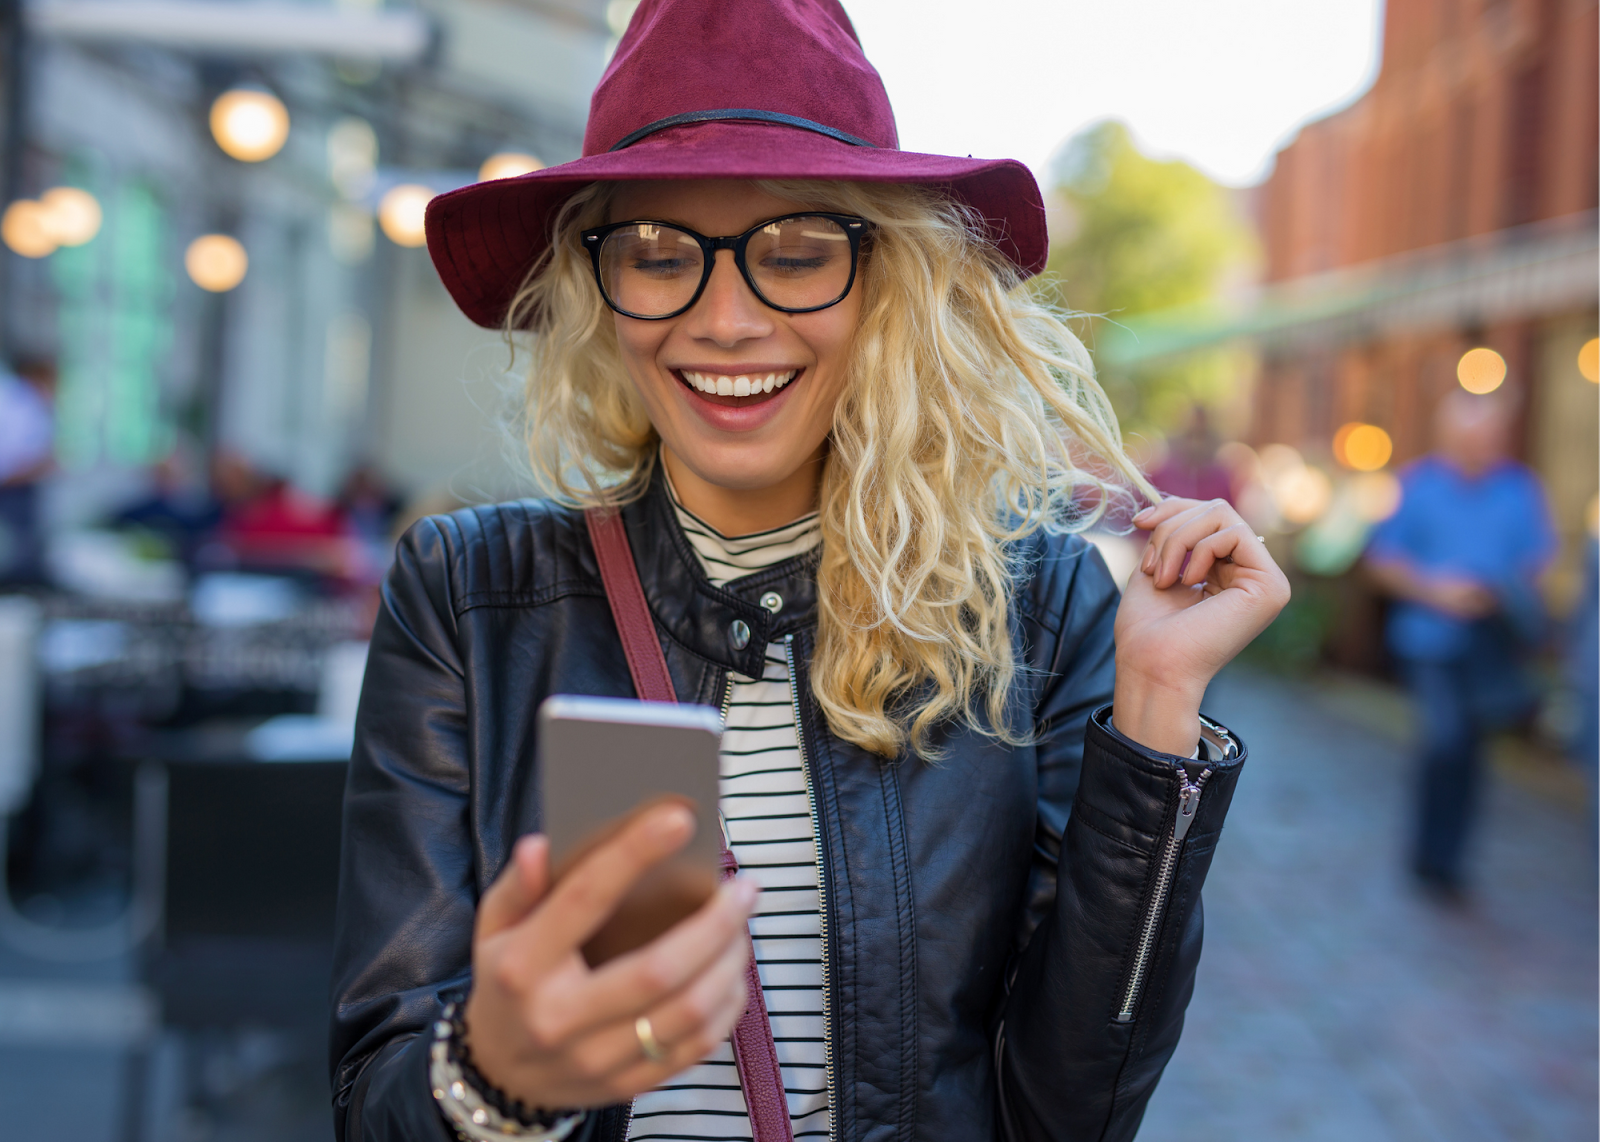 blonde girl with purple hat smiling at phone